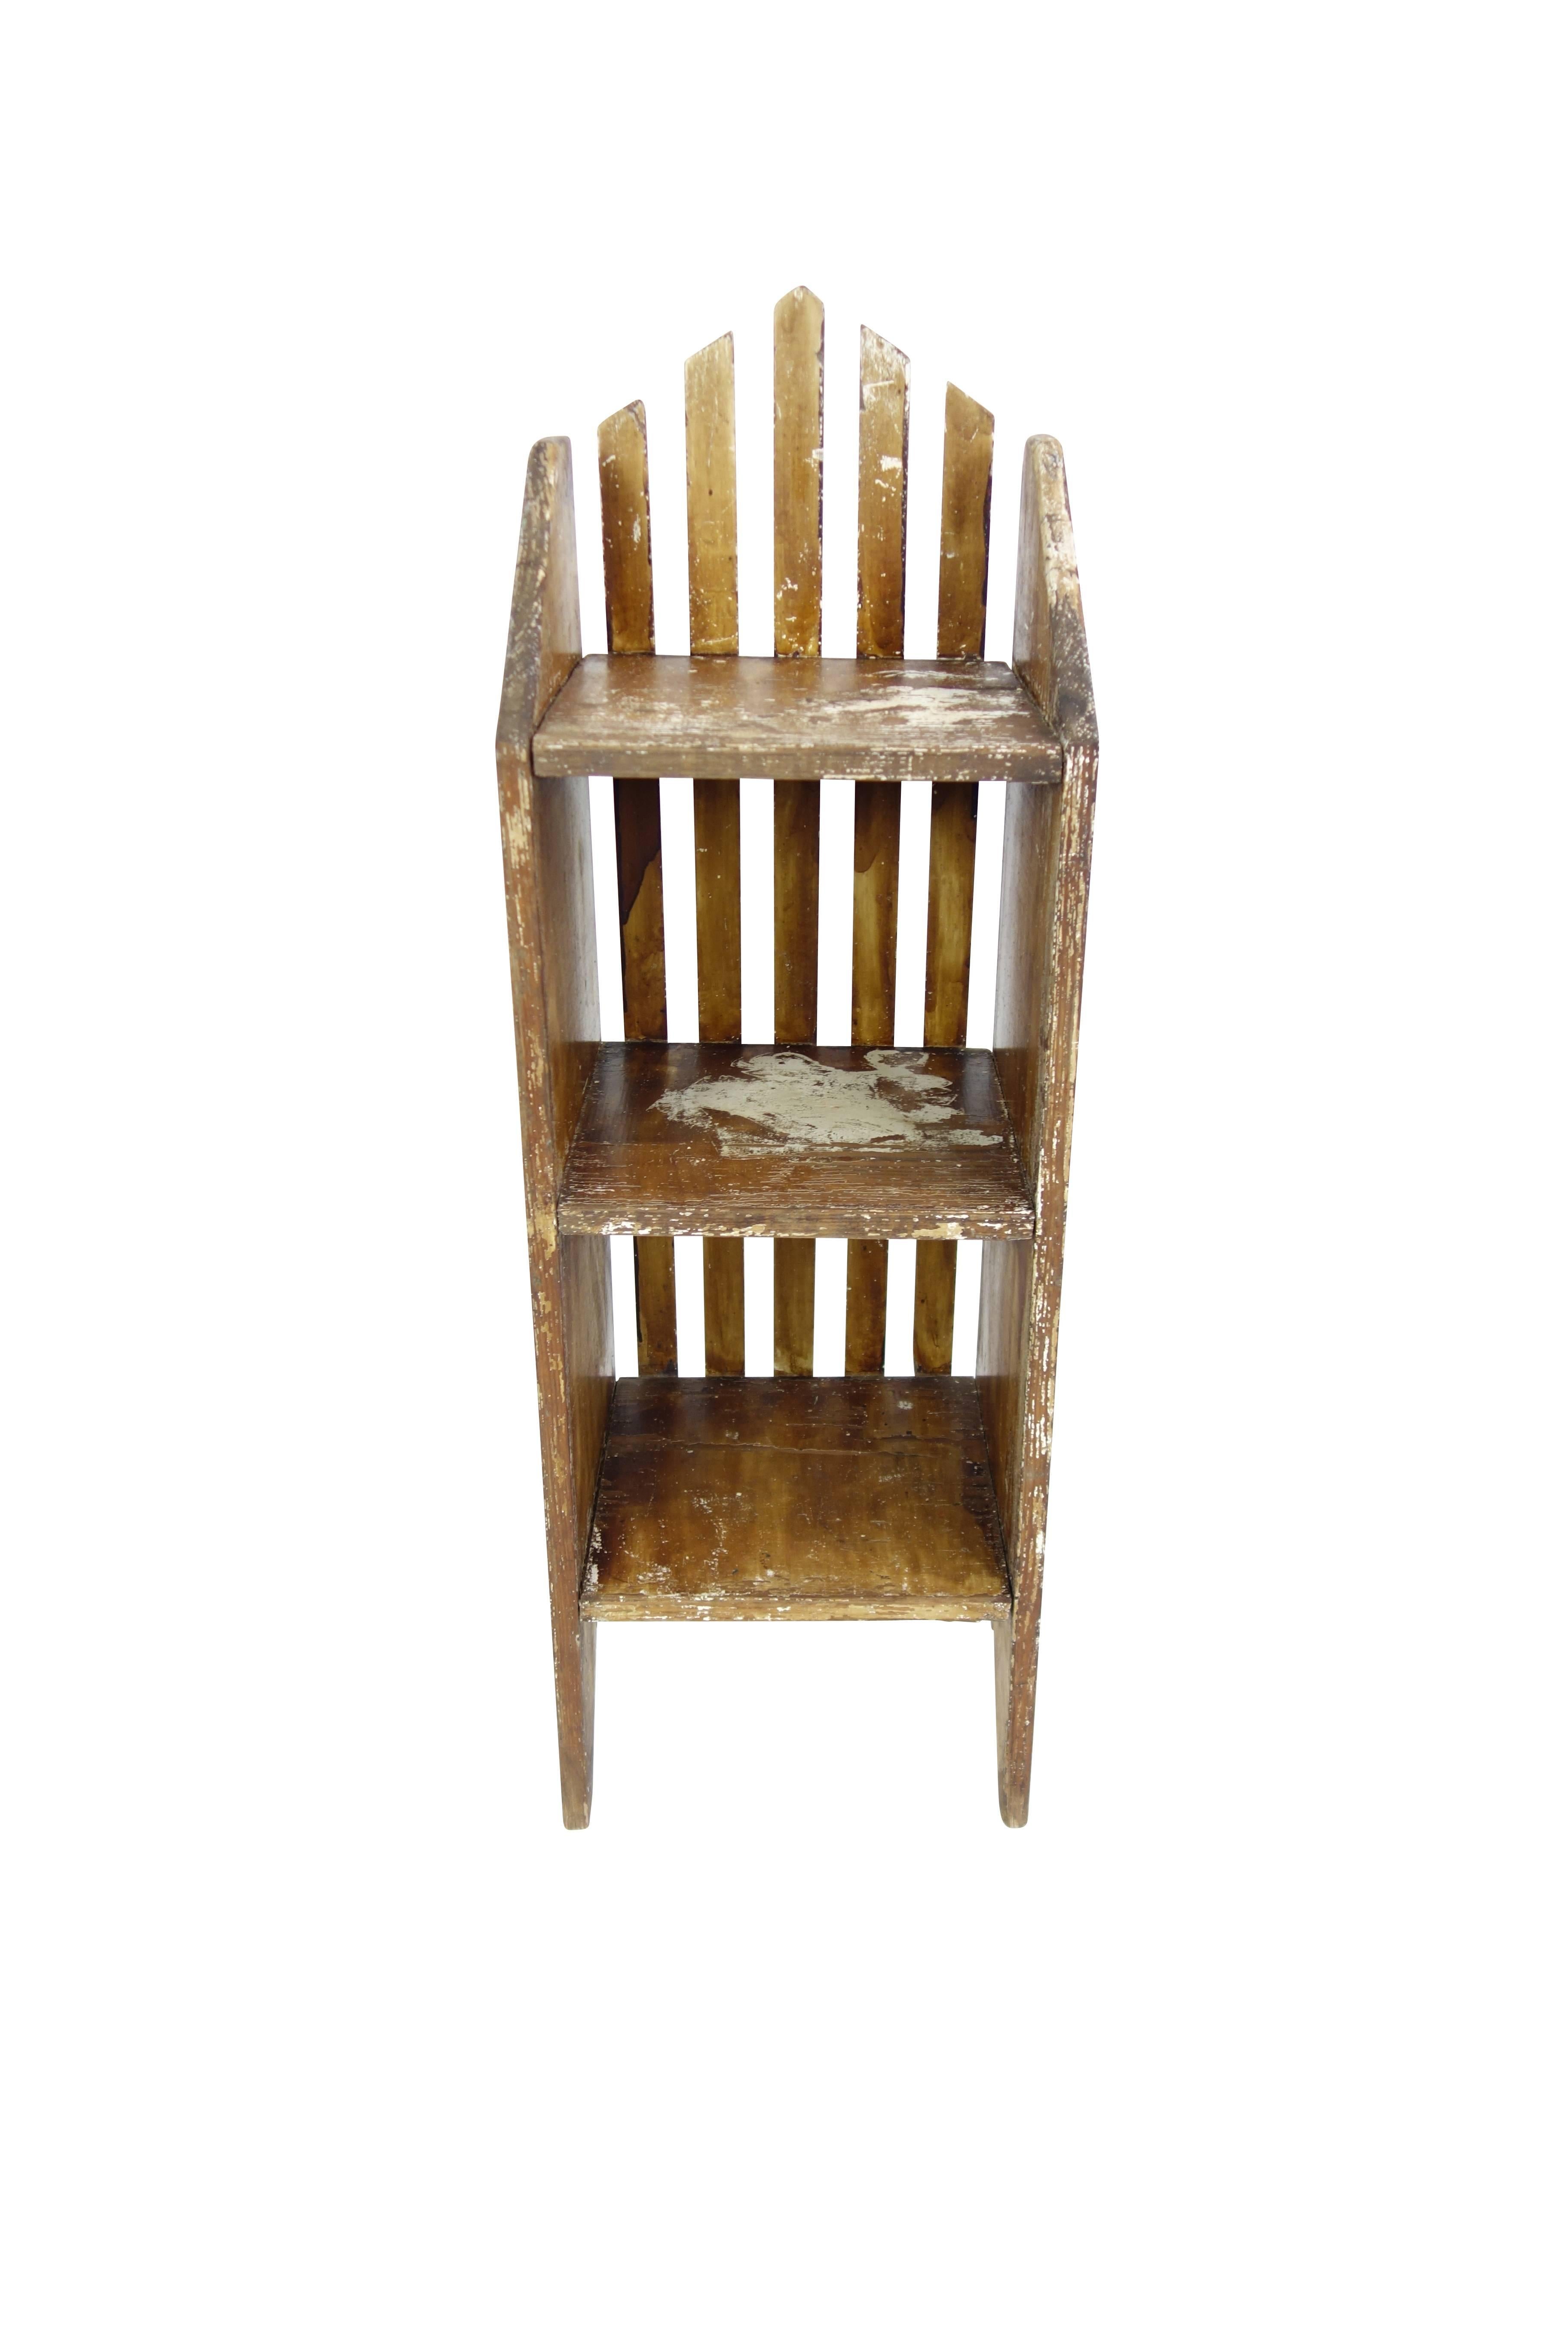 American Primitive Painted Three-Tier Shelf For Sale